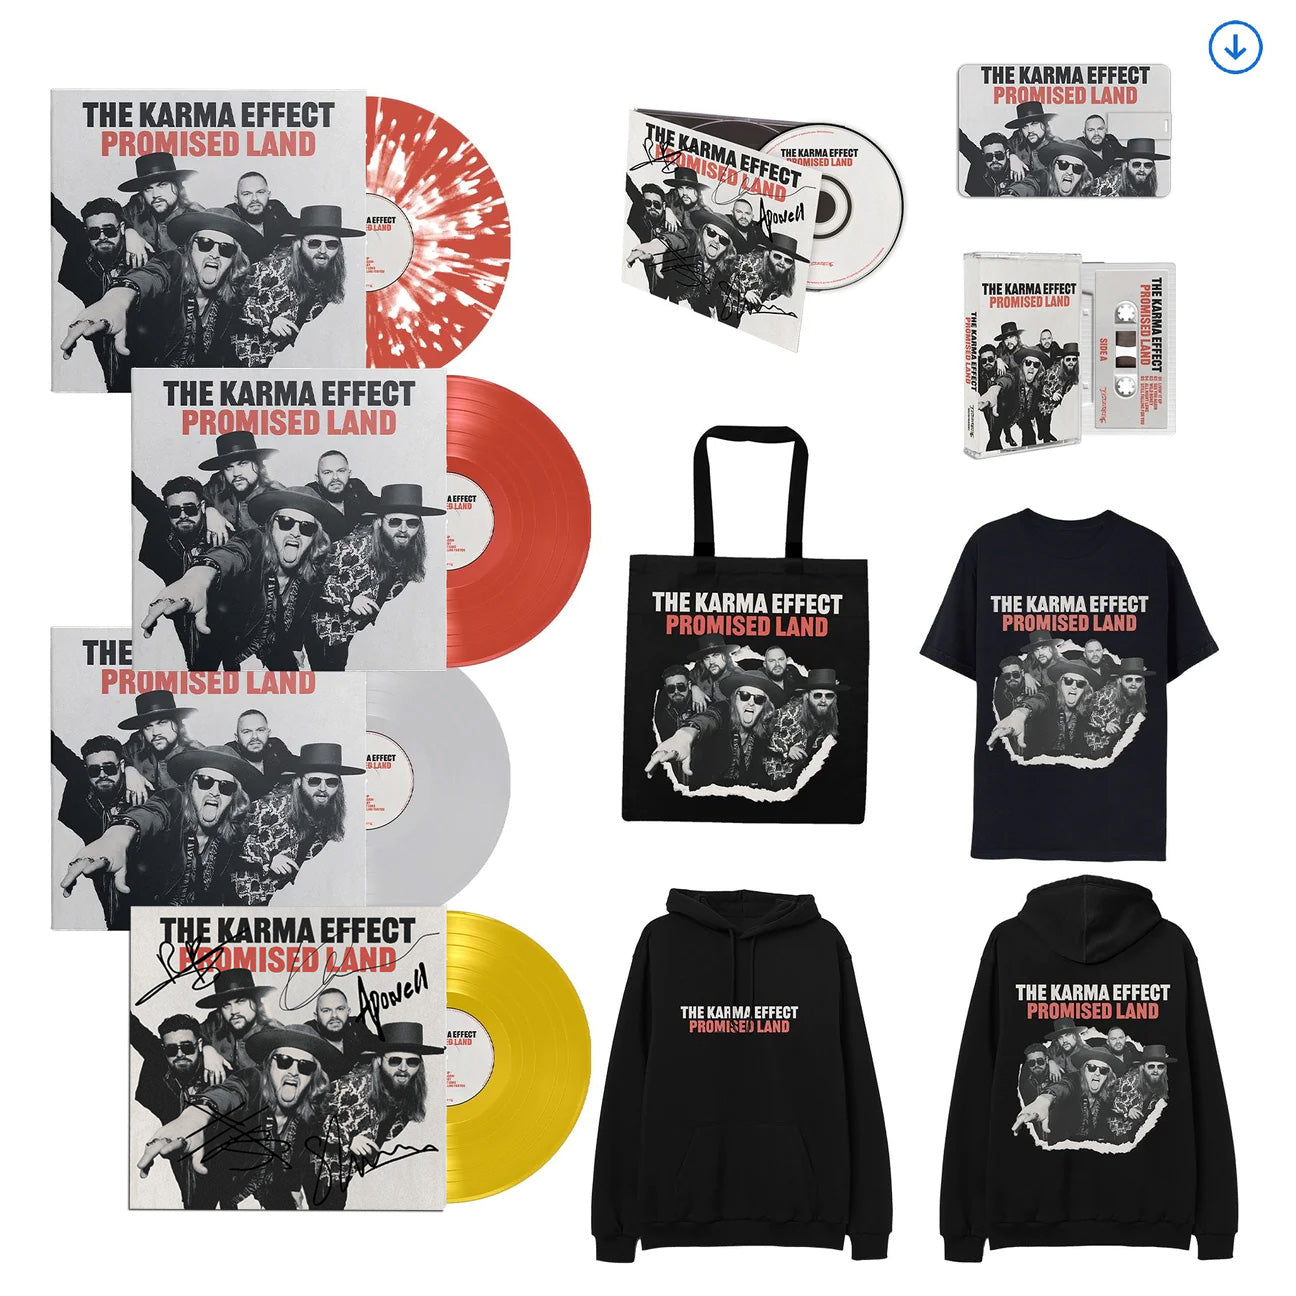 The Karma Effect "Promised Land" Collector's Bundle inc. Download